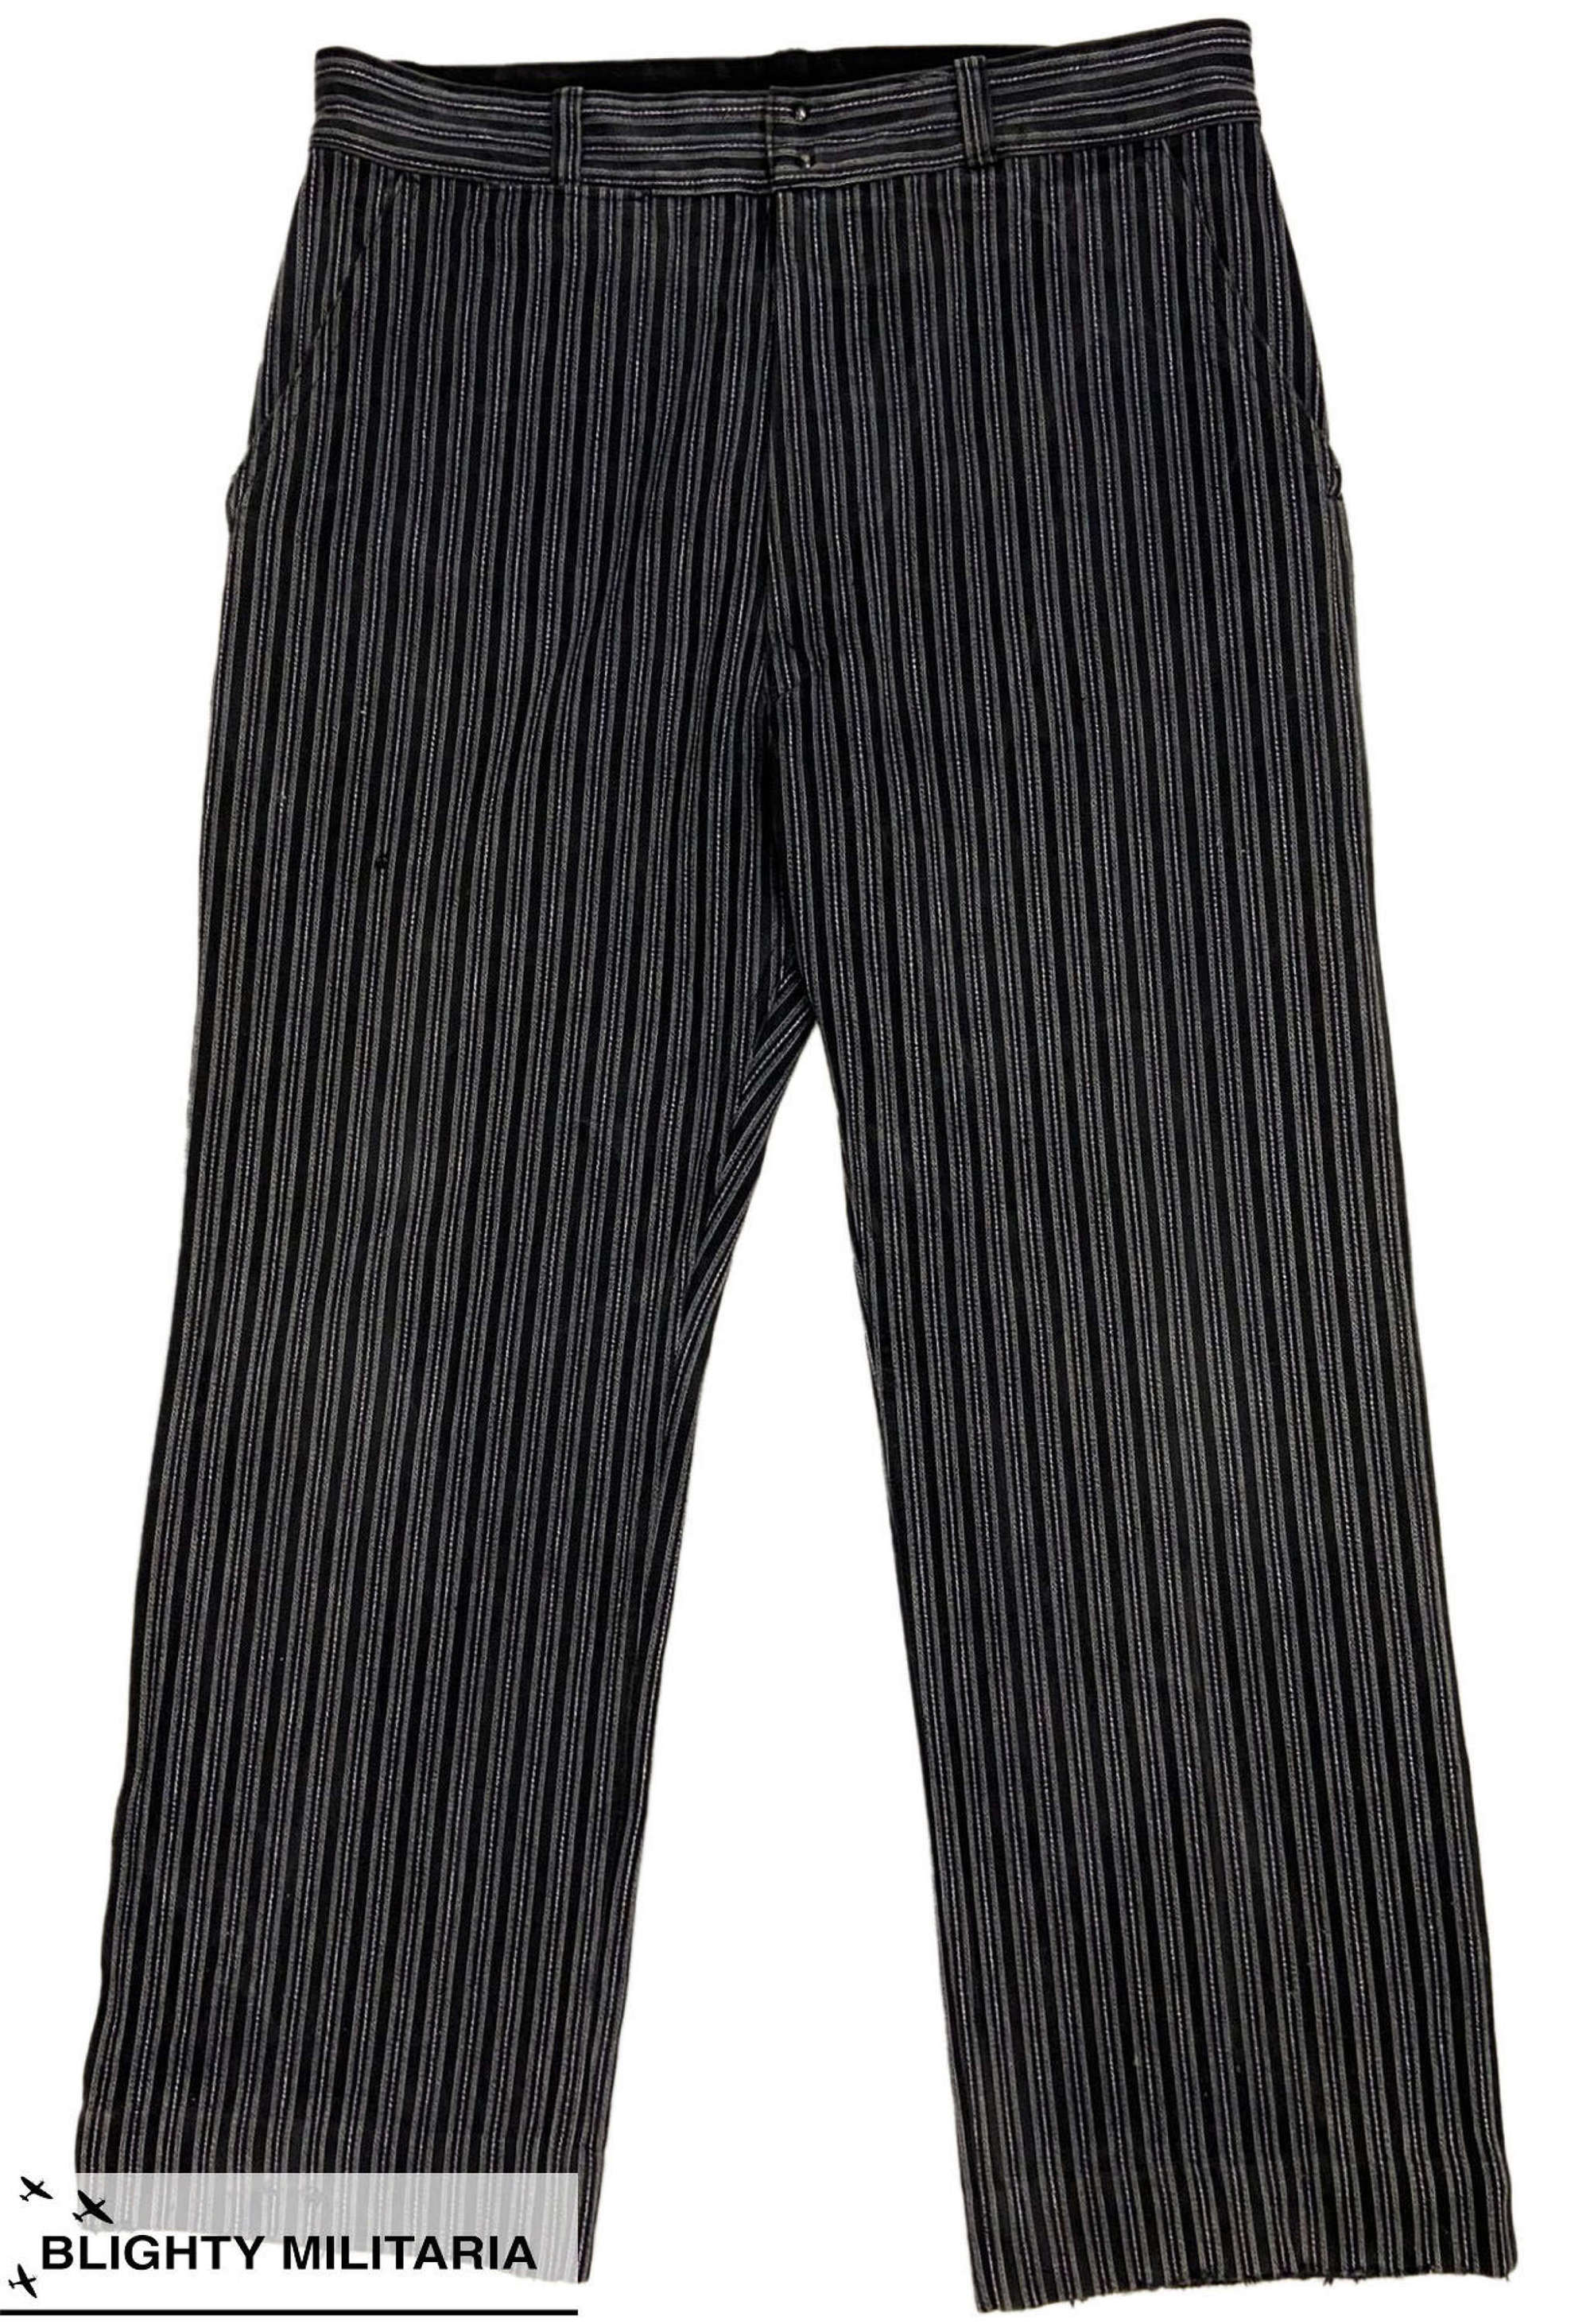 Original 1940s French Striped Work Trousers